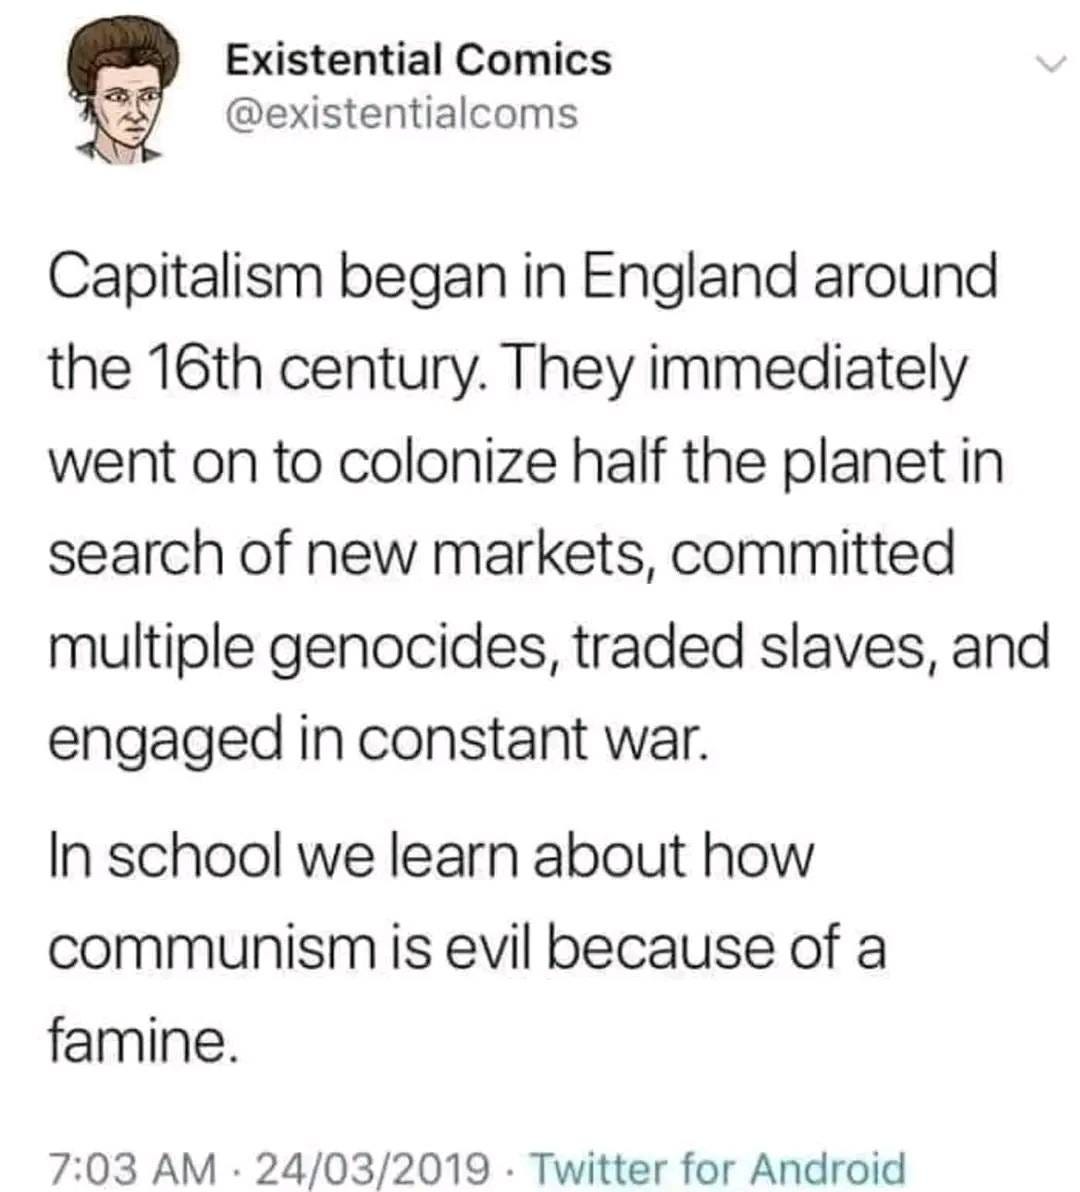 May be an image of text that says 'Existential Comics @existentialcoms Capitalism began in England around the 16th century. They immediately went on to colonize half the planet in search of new markets, committed multiple genocides, traded slaves, and engaged in constant war. In school we learn about how communism is evil because of a famine. 7:03 AM 24/03/2019 Twitter for Android'